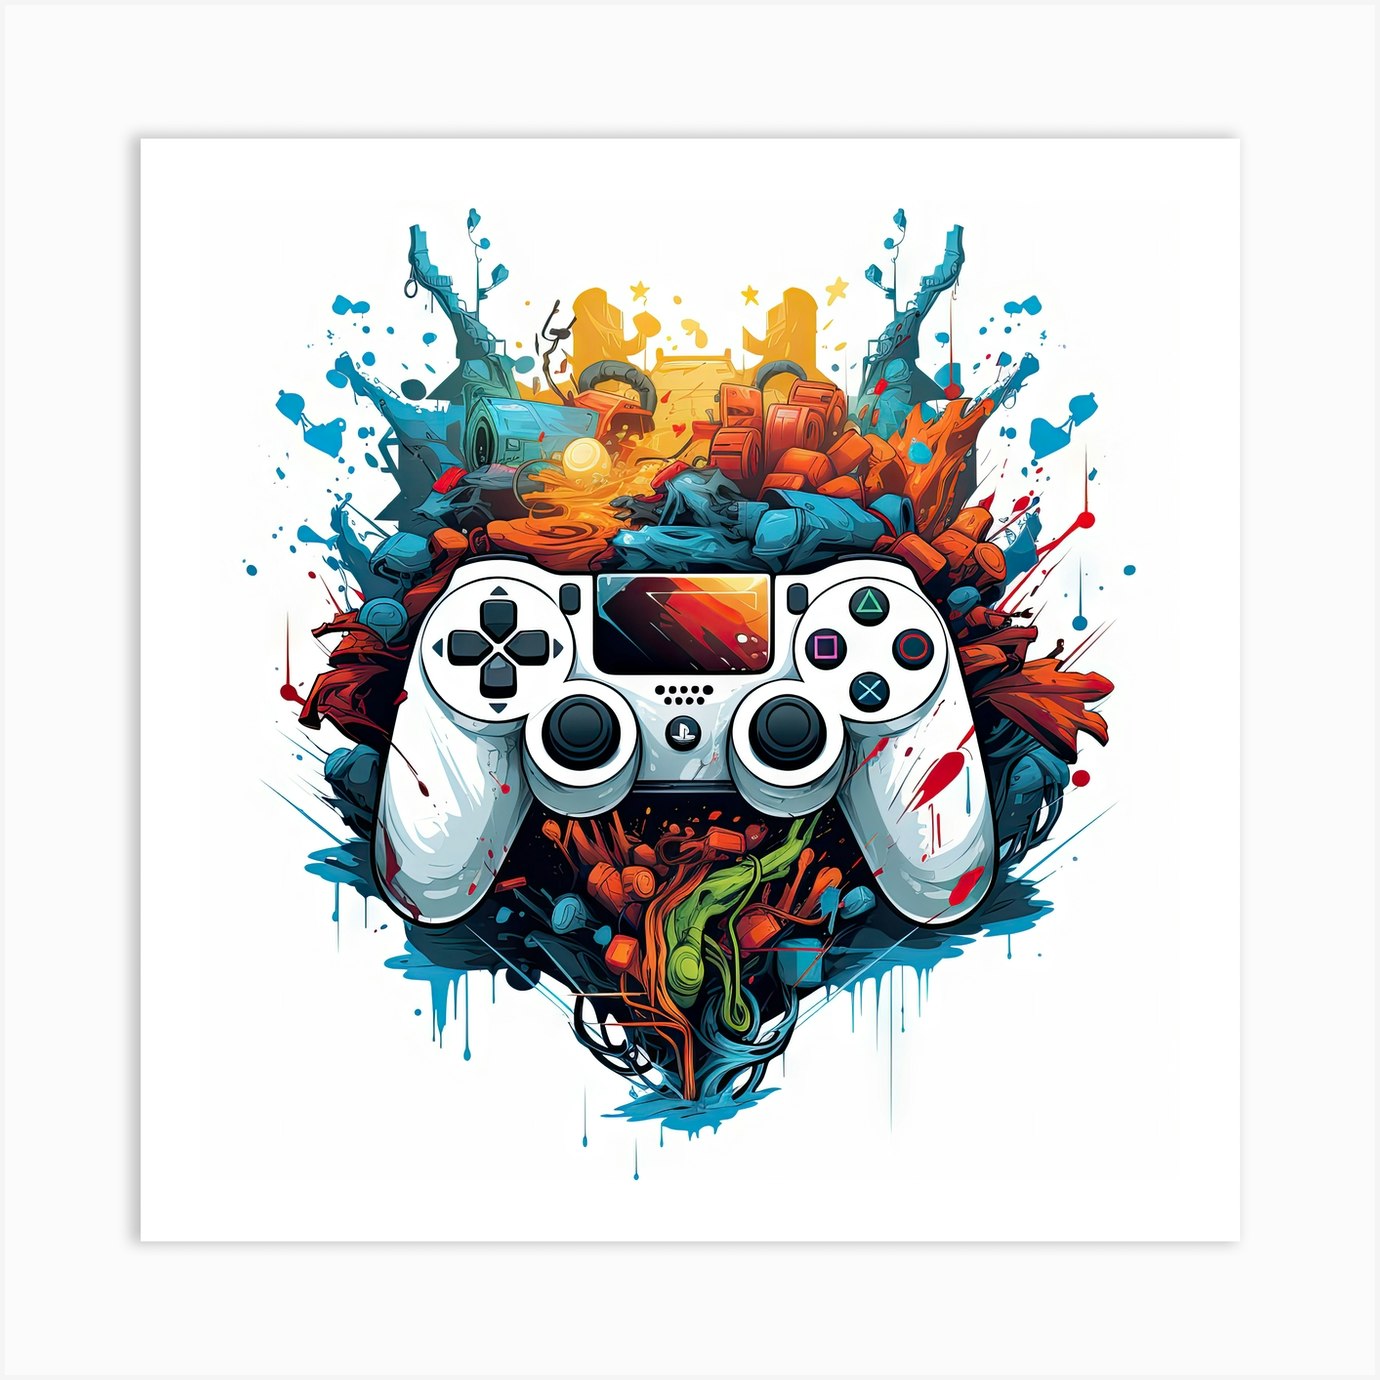 Game Print Minimal Poster With Controller And Abstract Geometric